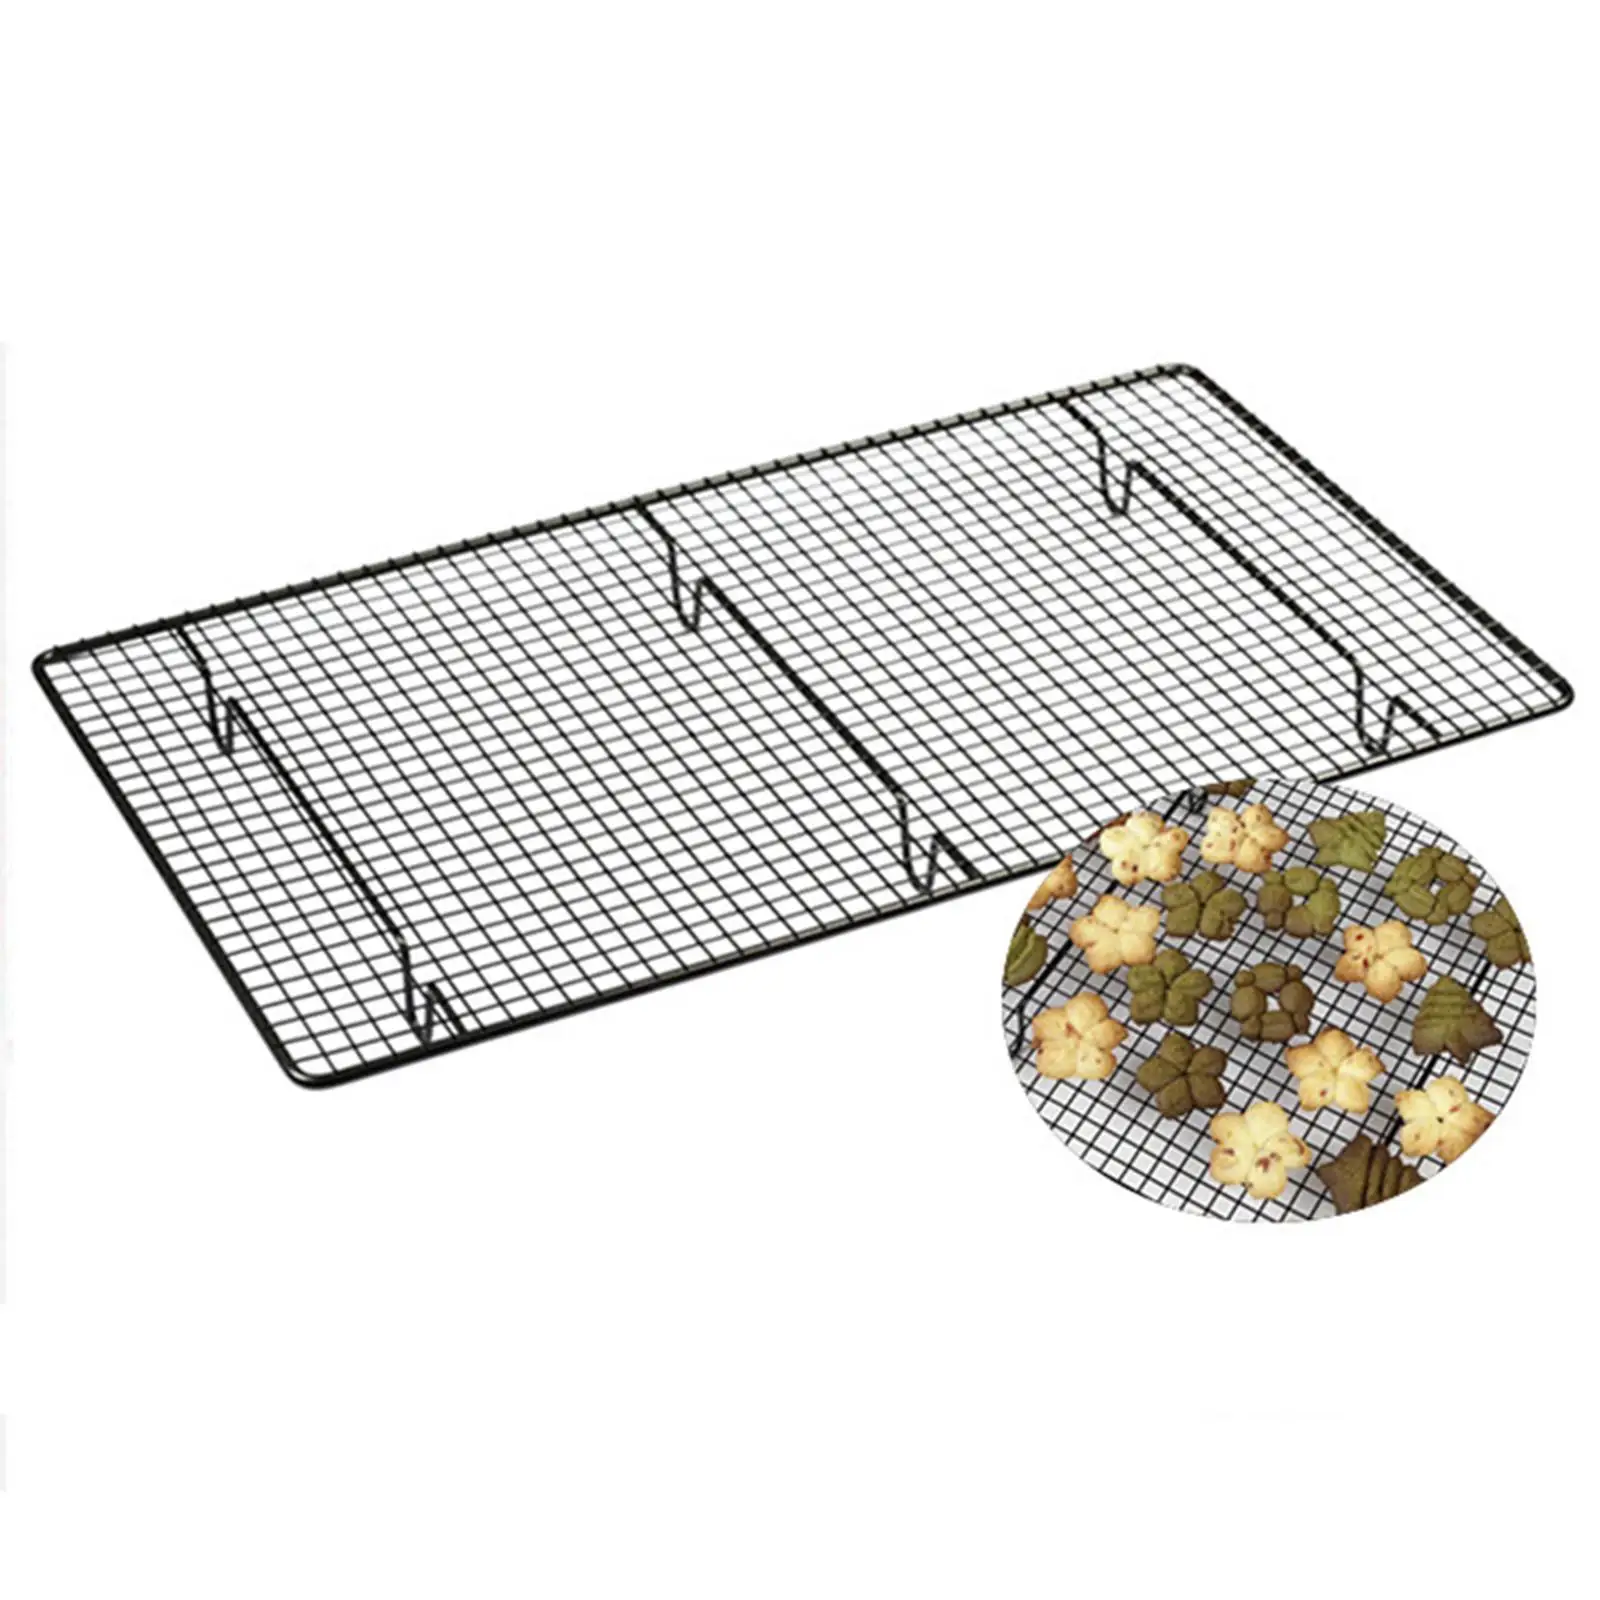 Wire Baking Rack Outdoors Wire Mesh Cooking Baking Non Stick Picnics Baking Cake Cooling Rack Cold Drying Net Multifunctional